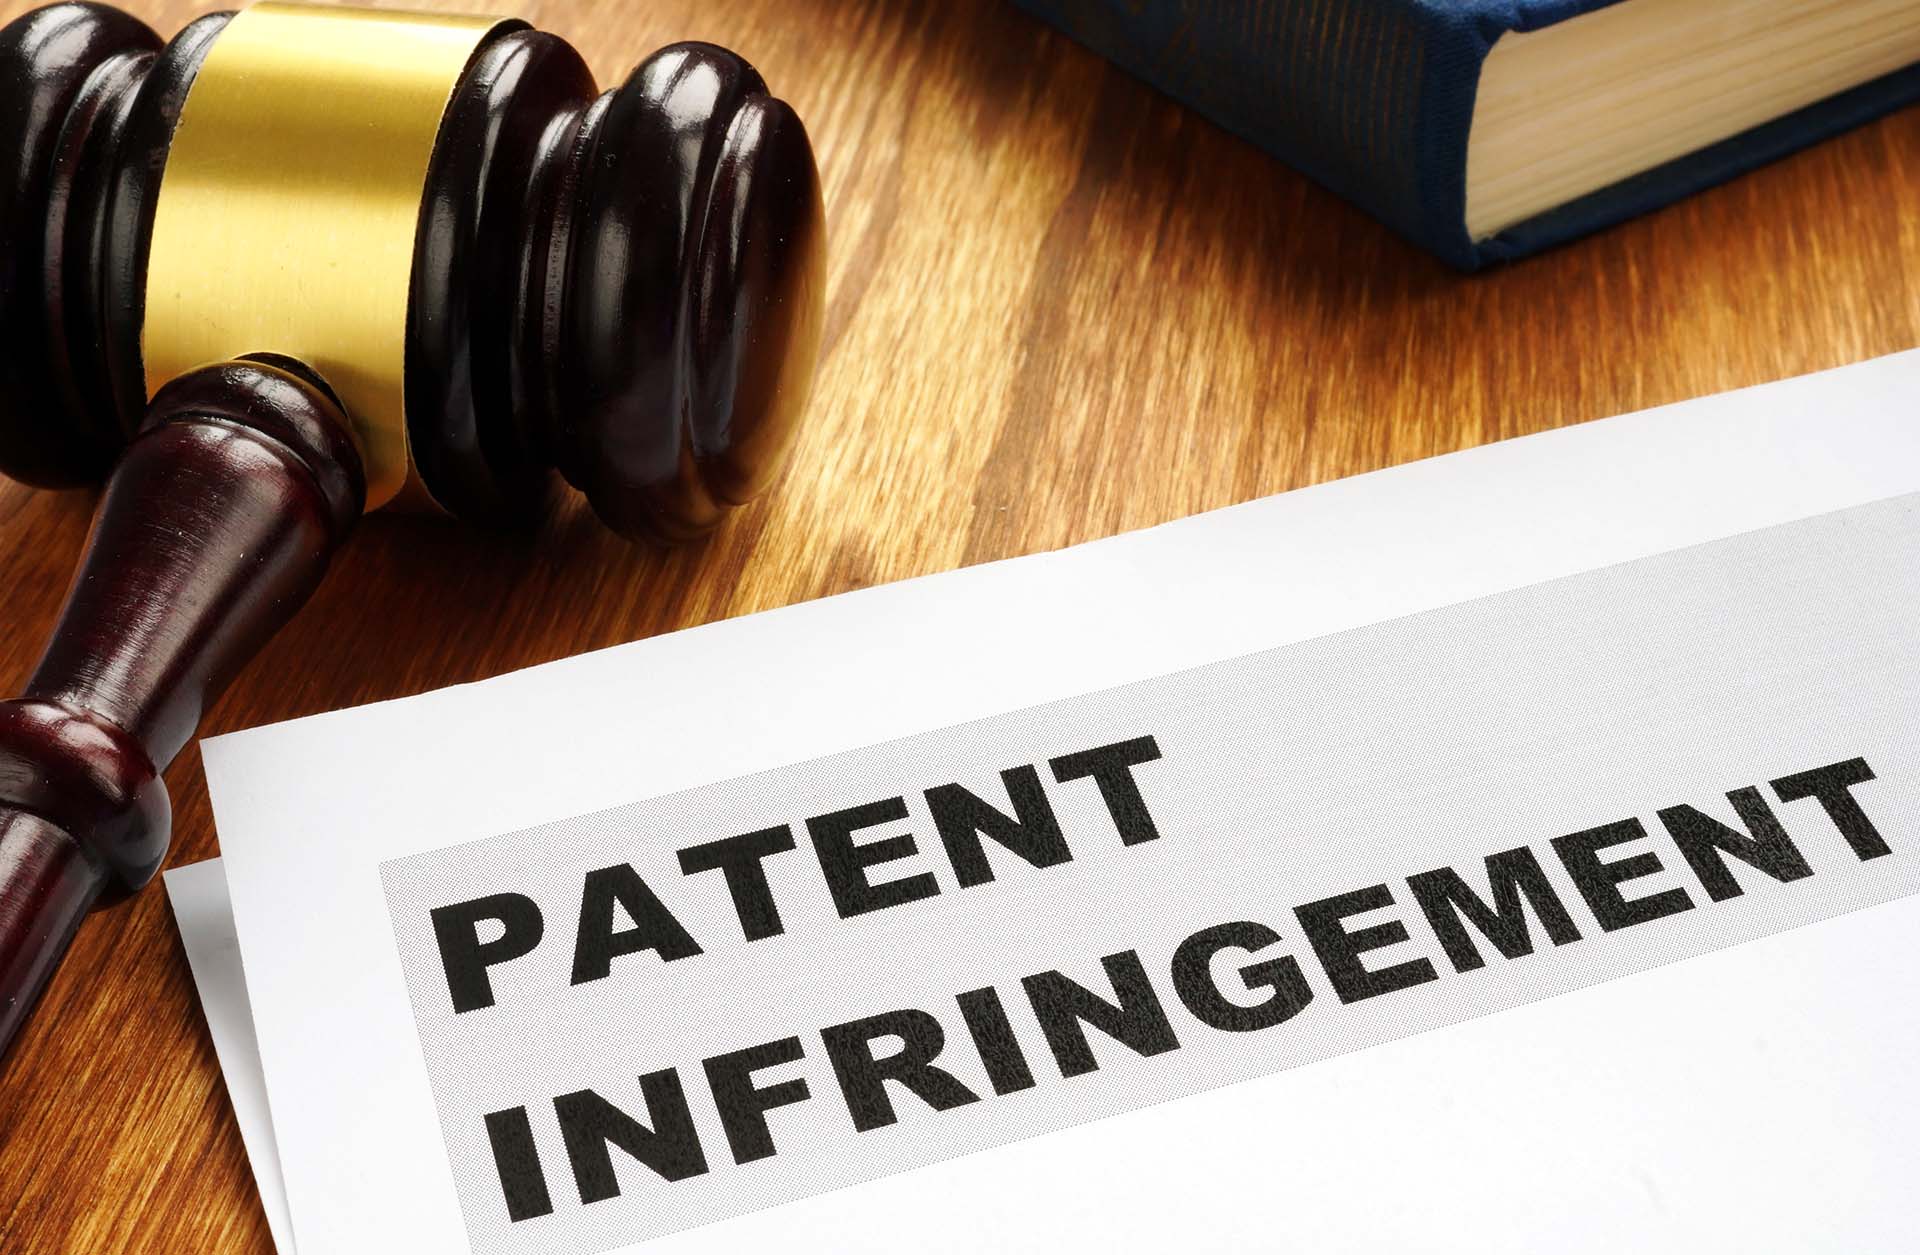 Miller Mendel files a patent infringement lawsuit against Washington County Sheriff’s Office for use of infringing Guardian Alliance Technologies software